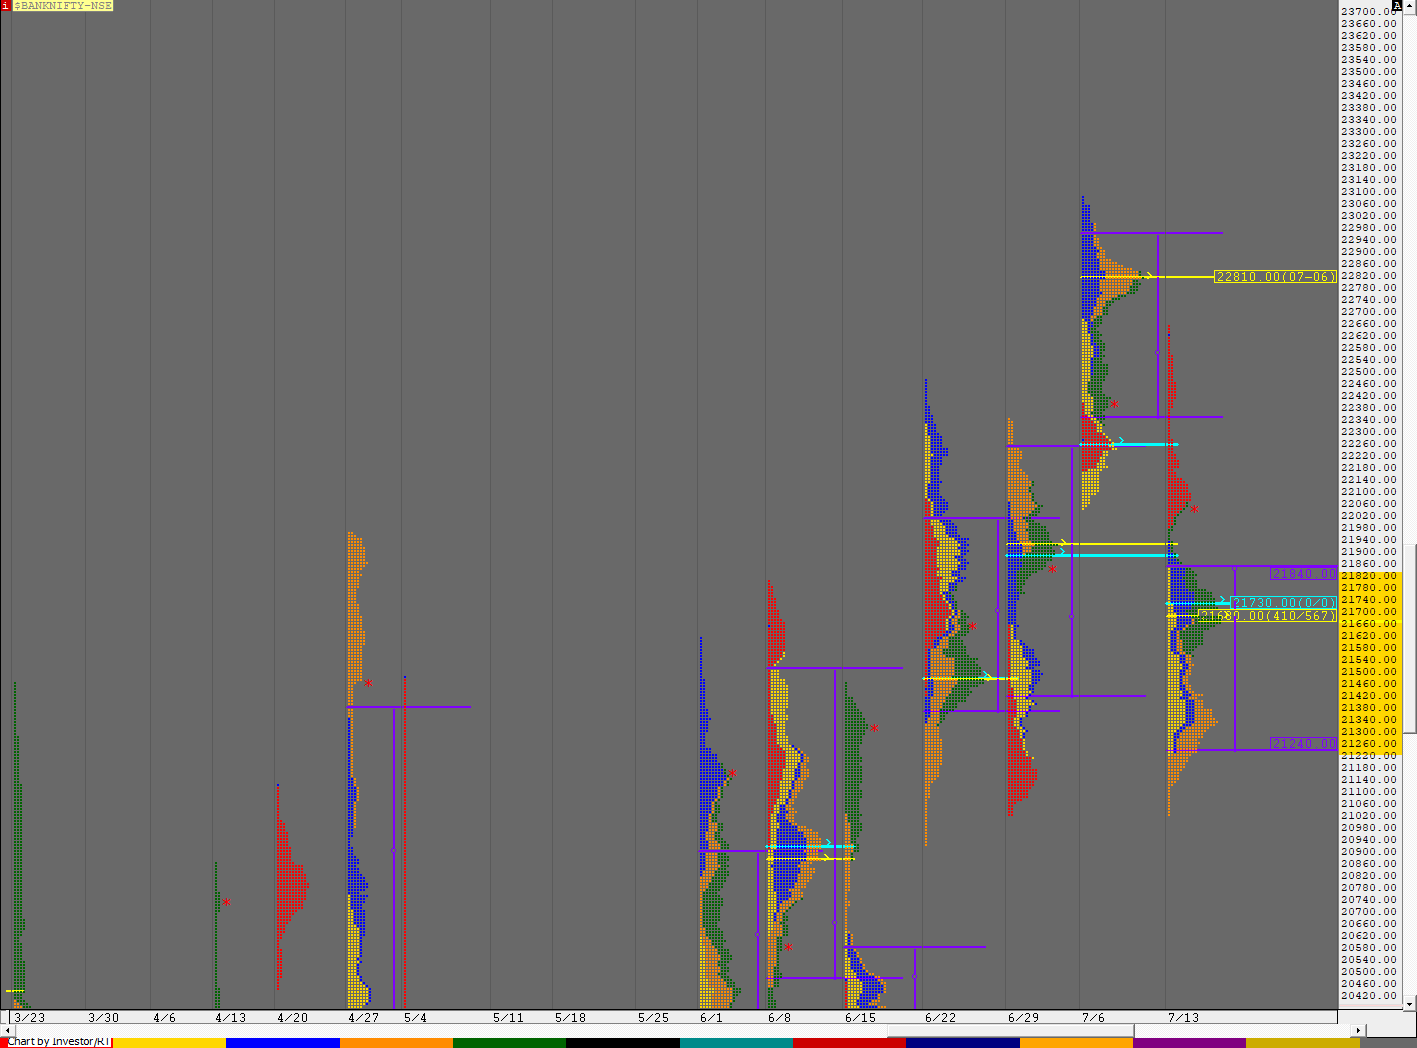 Bn Weekly 2 Weekly Charts (13Th To 17Th July 2020) And Market Profile Analysis Banknifty Futures, Charts, Day Trading, Intraday Trading, Intraday Trading Strategies, Market Profile, Market Profile Trading Strategies, Nifty Futures, Order Flow Analysis, Support And Resistance, Technical Analysis, Trading Strategies, Volume Profile Trading